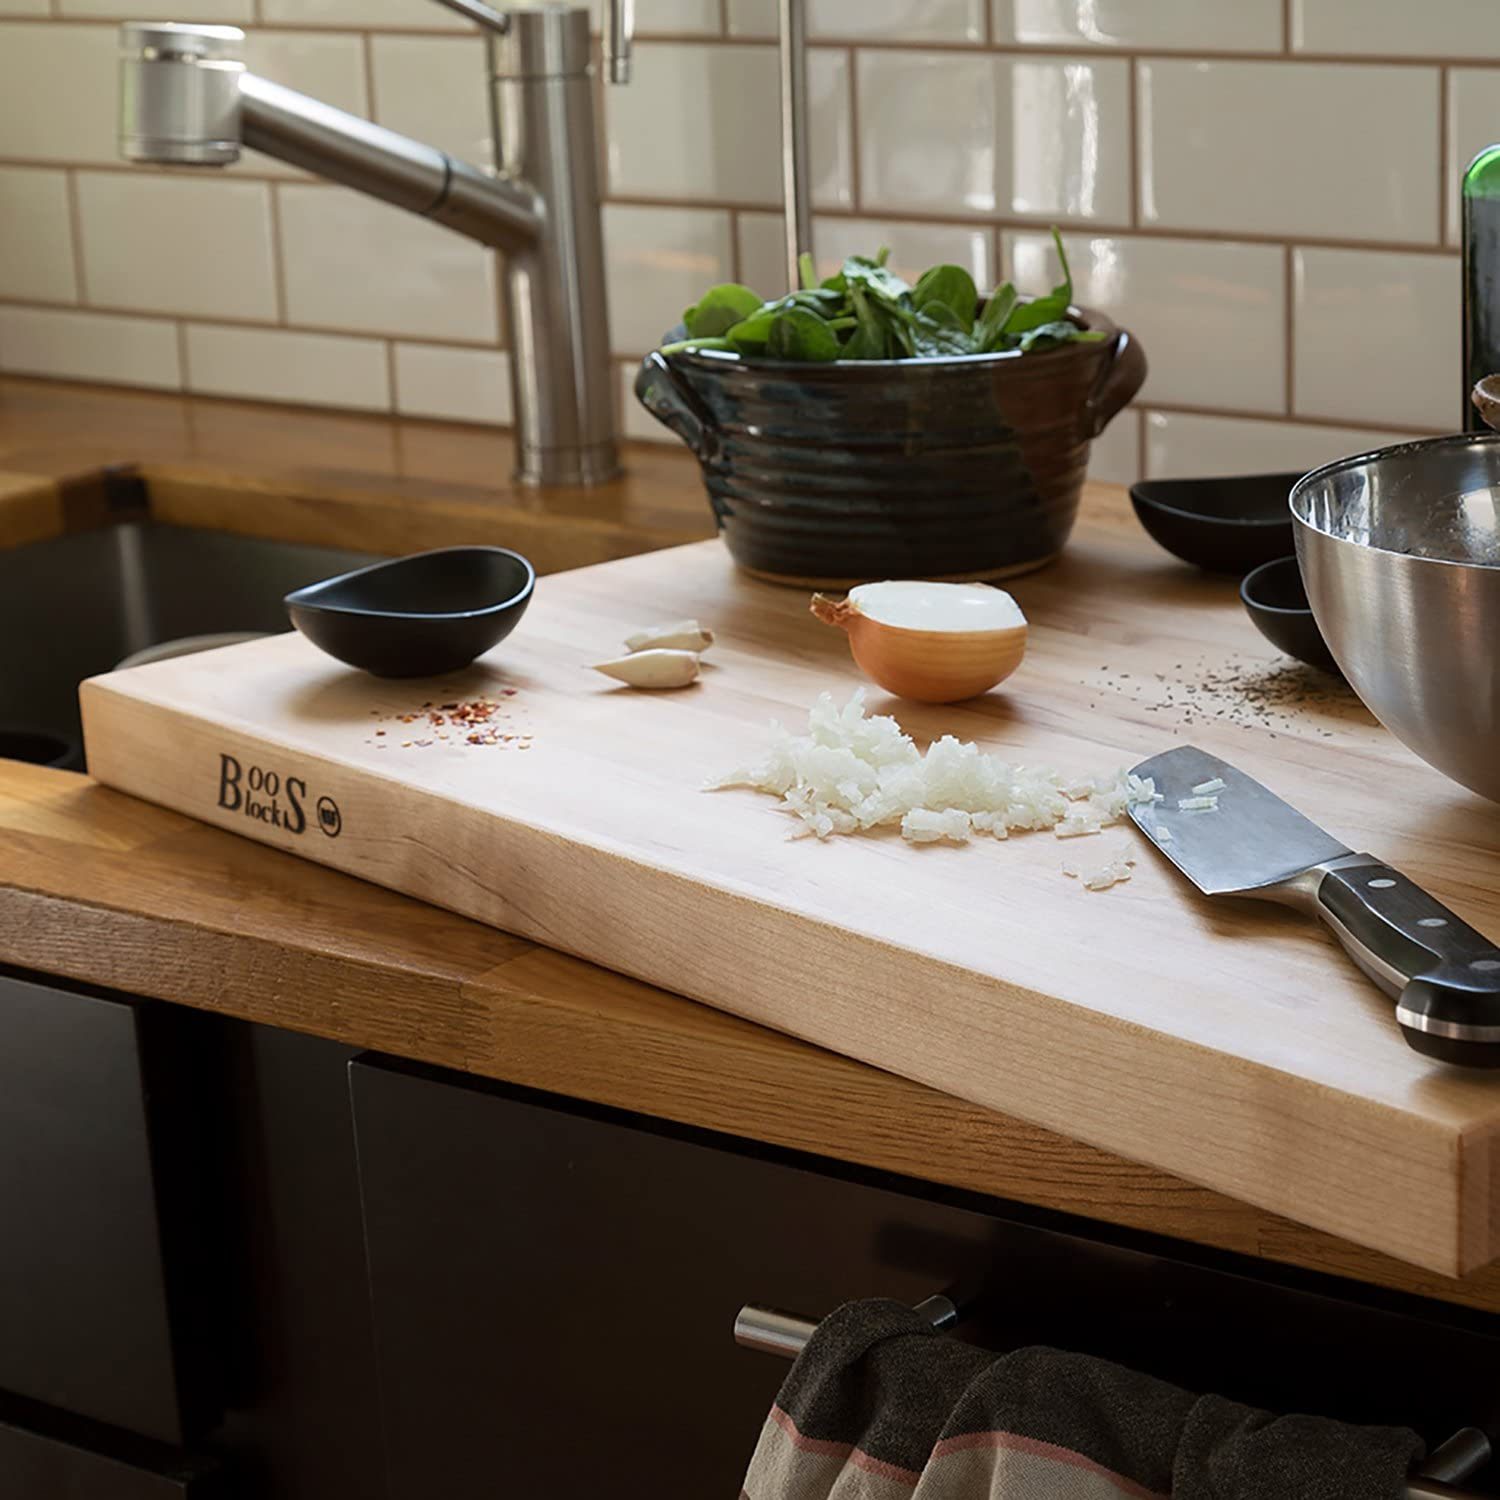 A taste of Microsoft's all-electric kitchen